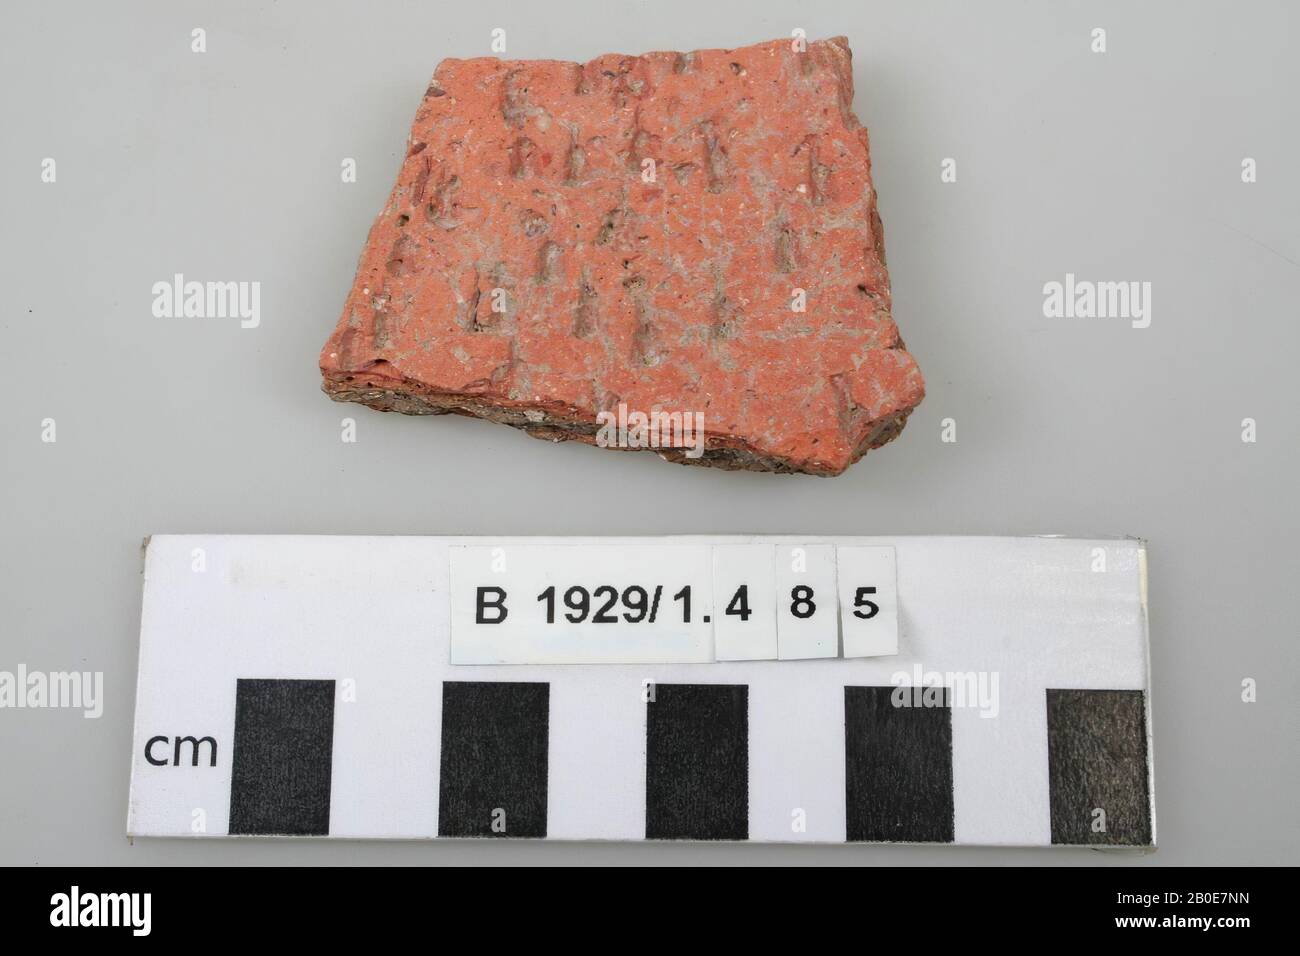 A fragment of a baking tray with oval-shaped dots, crockery, earthenware, B 6 cm, Iron Age 1200- 539 BC, Palestine Stock Photo